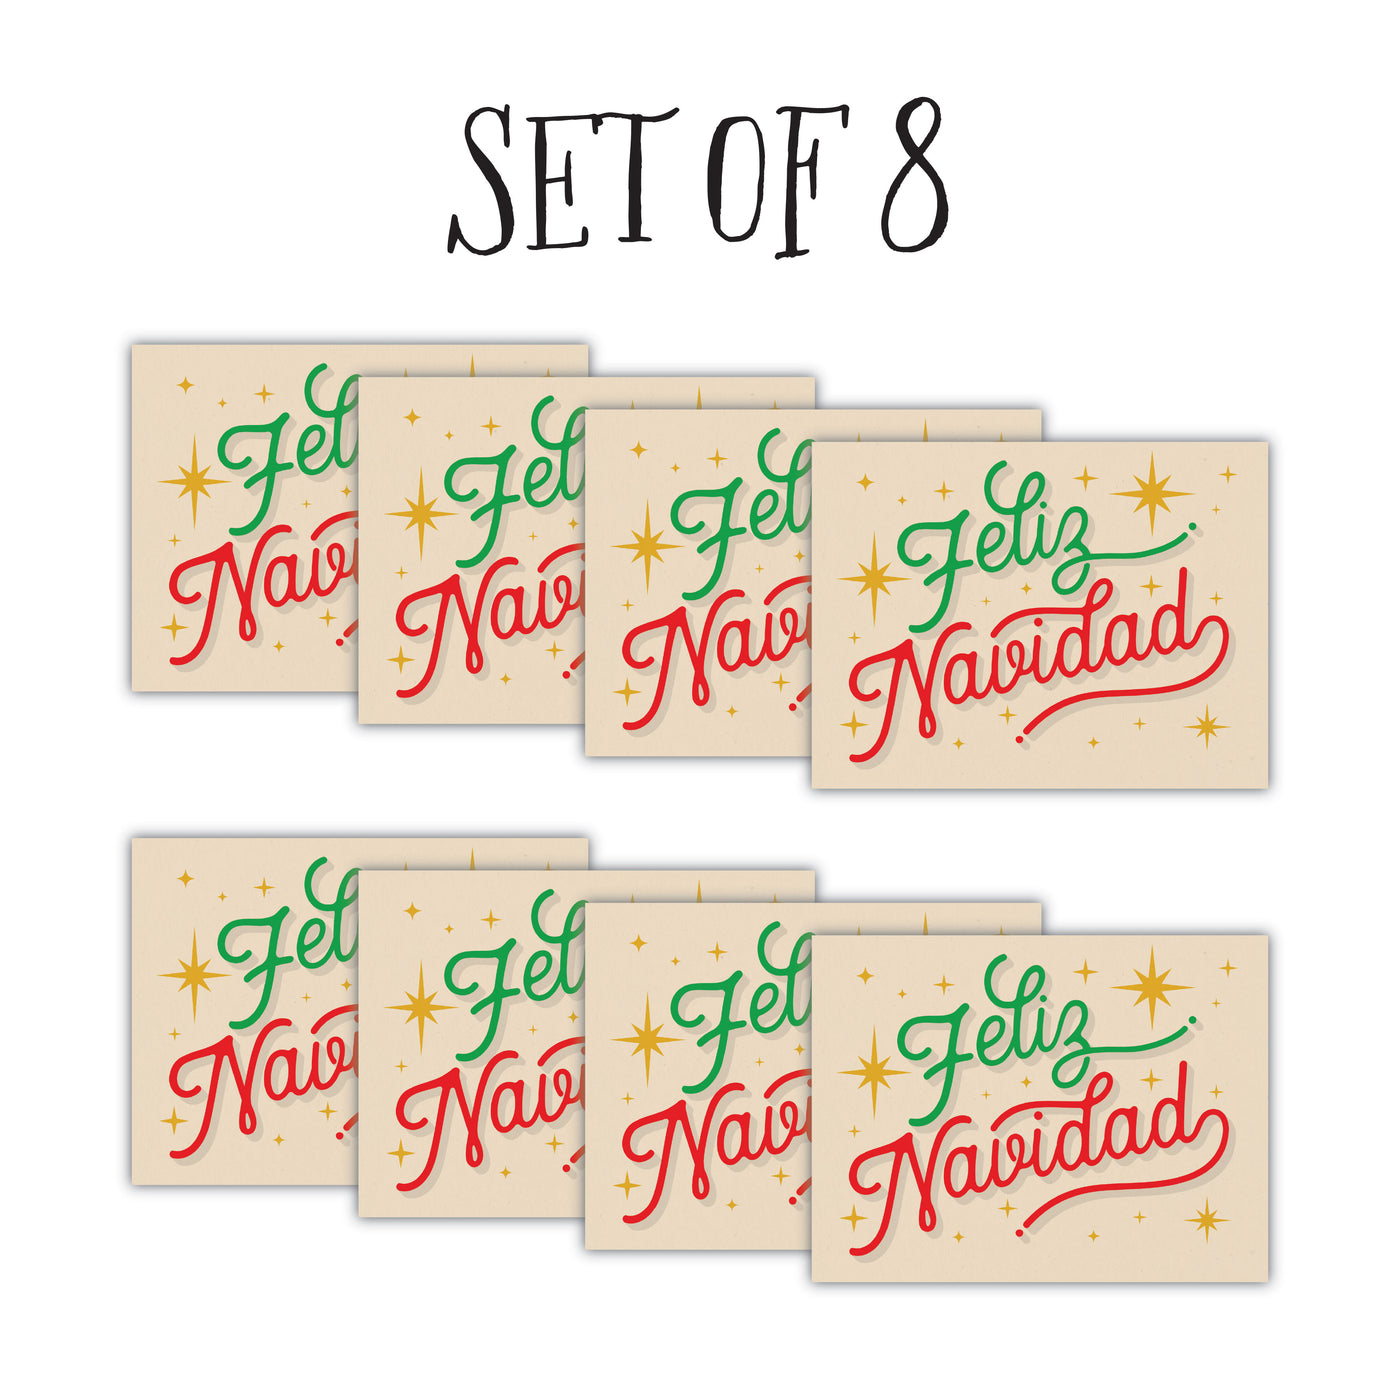 Front of 8 greeting cards with beige background, gold stars, red & green text that reads "Feliz Navidad"